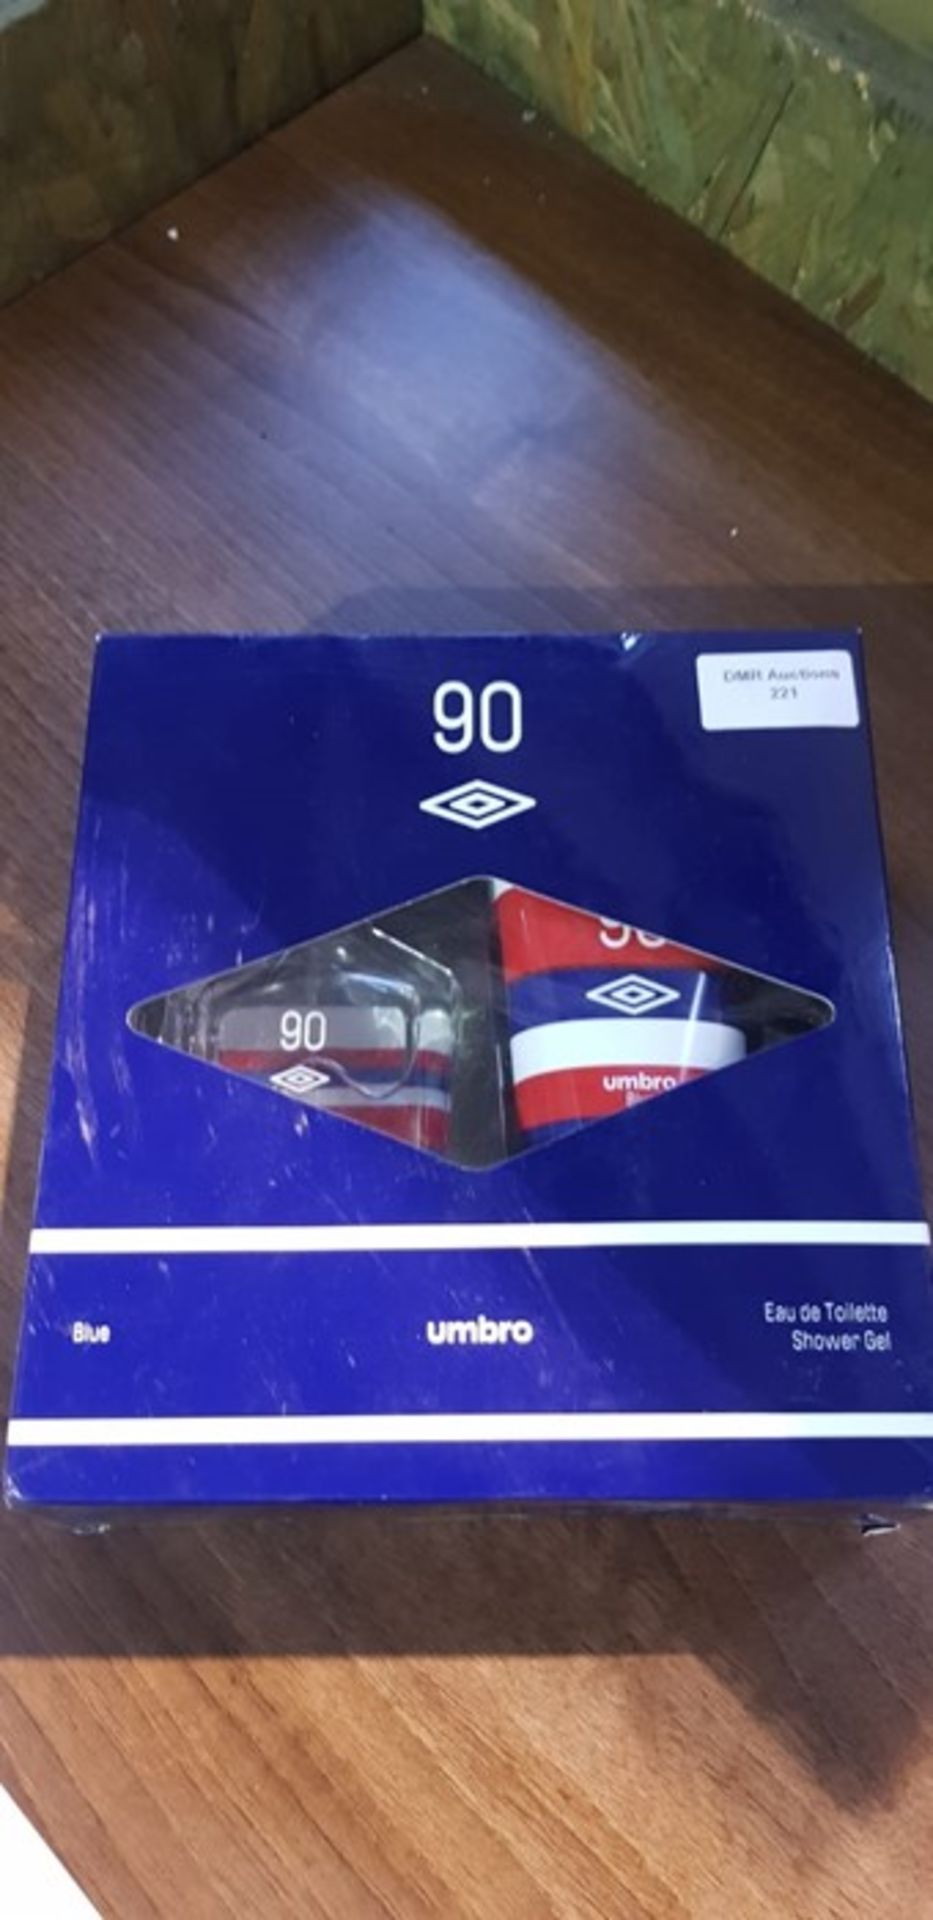 1 UMBRO BLUE SHOWER GEL GIFT SET / RRP £10.00 (VIEWING HIGHLY RECOMMENDED)